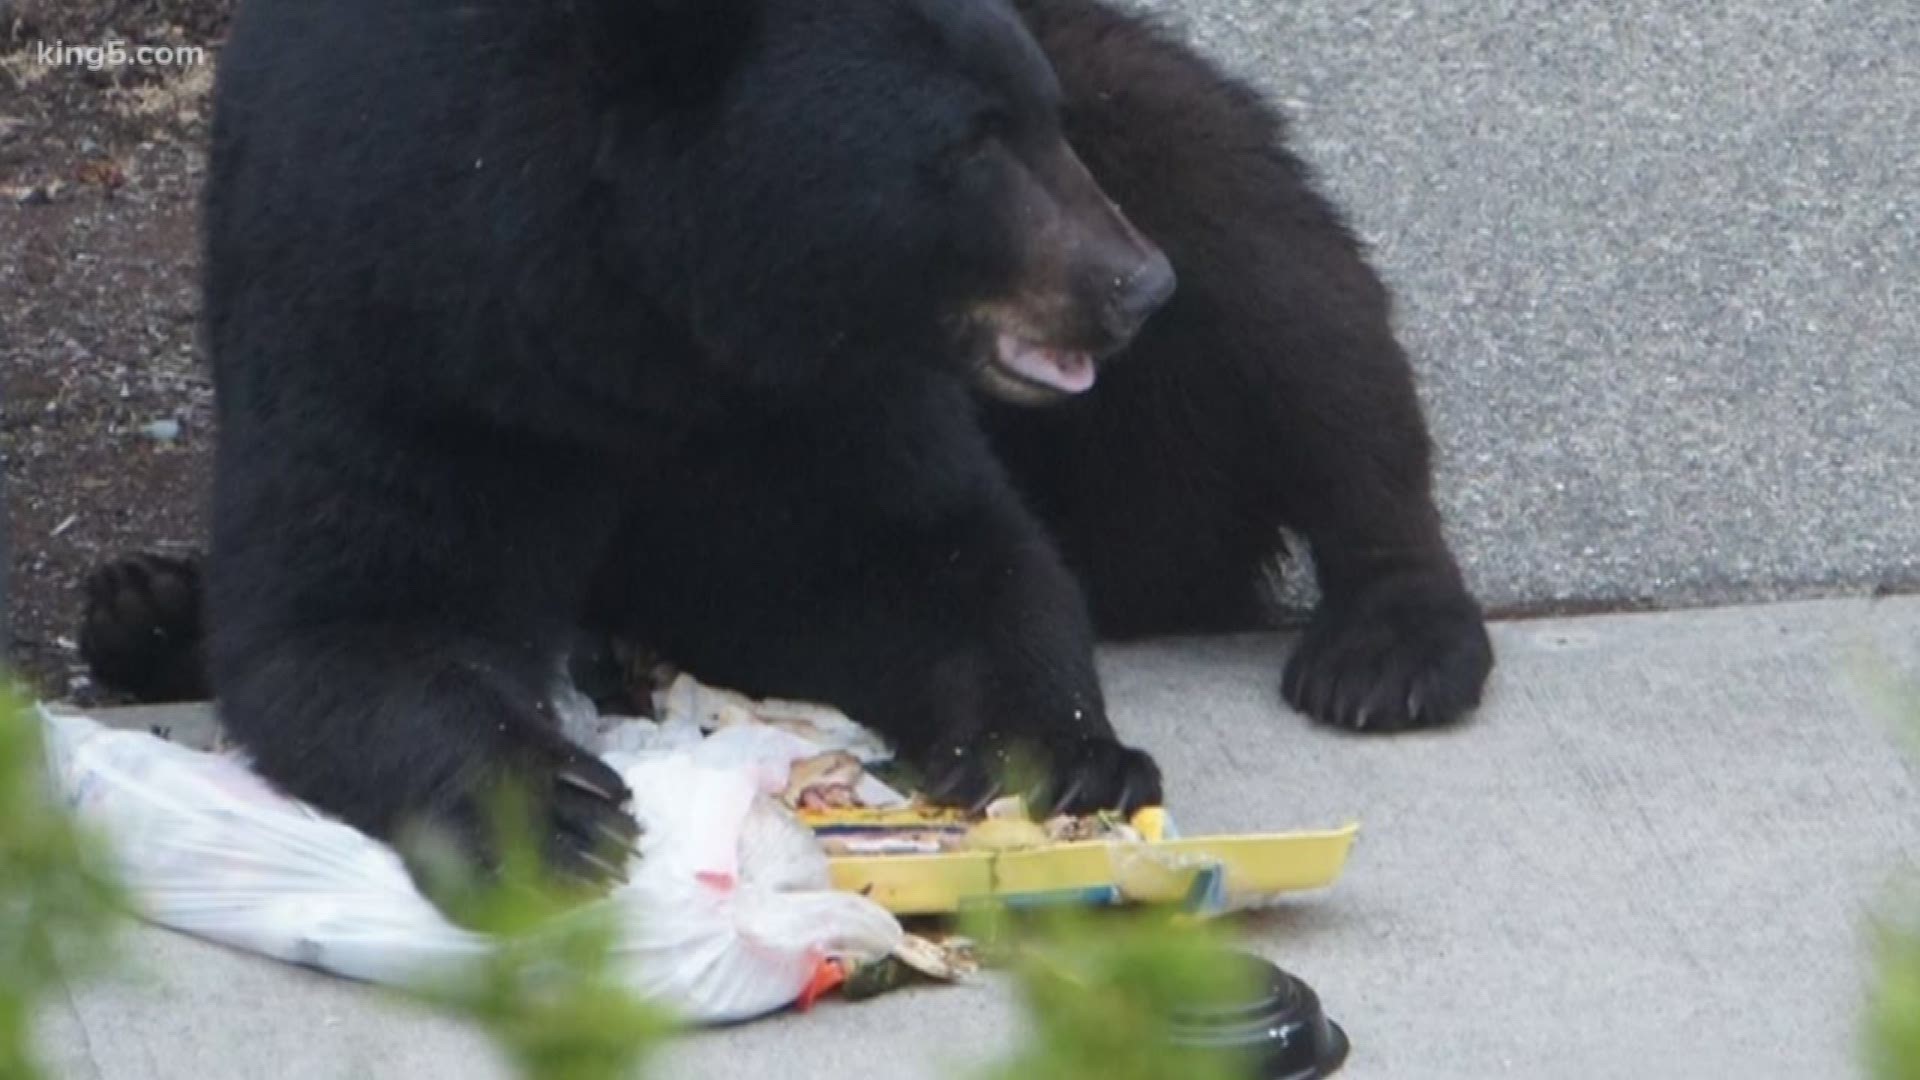 Bear incidents are on the rise within the increasingly popular North Cascades National Park. KING 5 environmental reporter Alison Morrow has more.